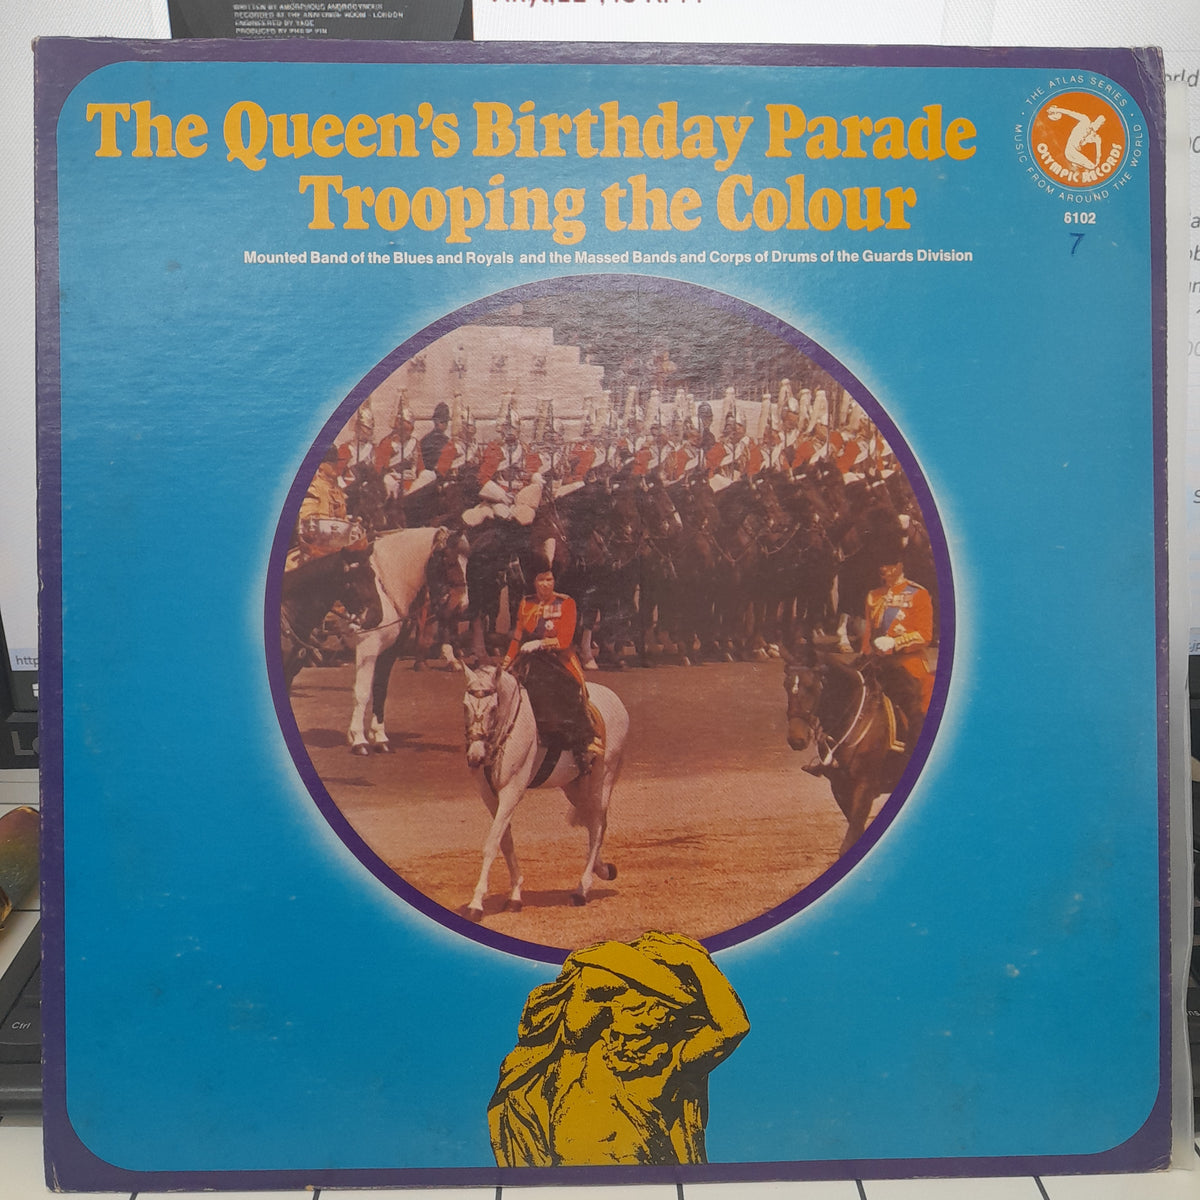 Band Of The Blues & Royals, The, Massed Bands, The, Corps Of Drums Of The Guards Division - The Queen's Birthday Parade Trooping The Colour (Vinyl)